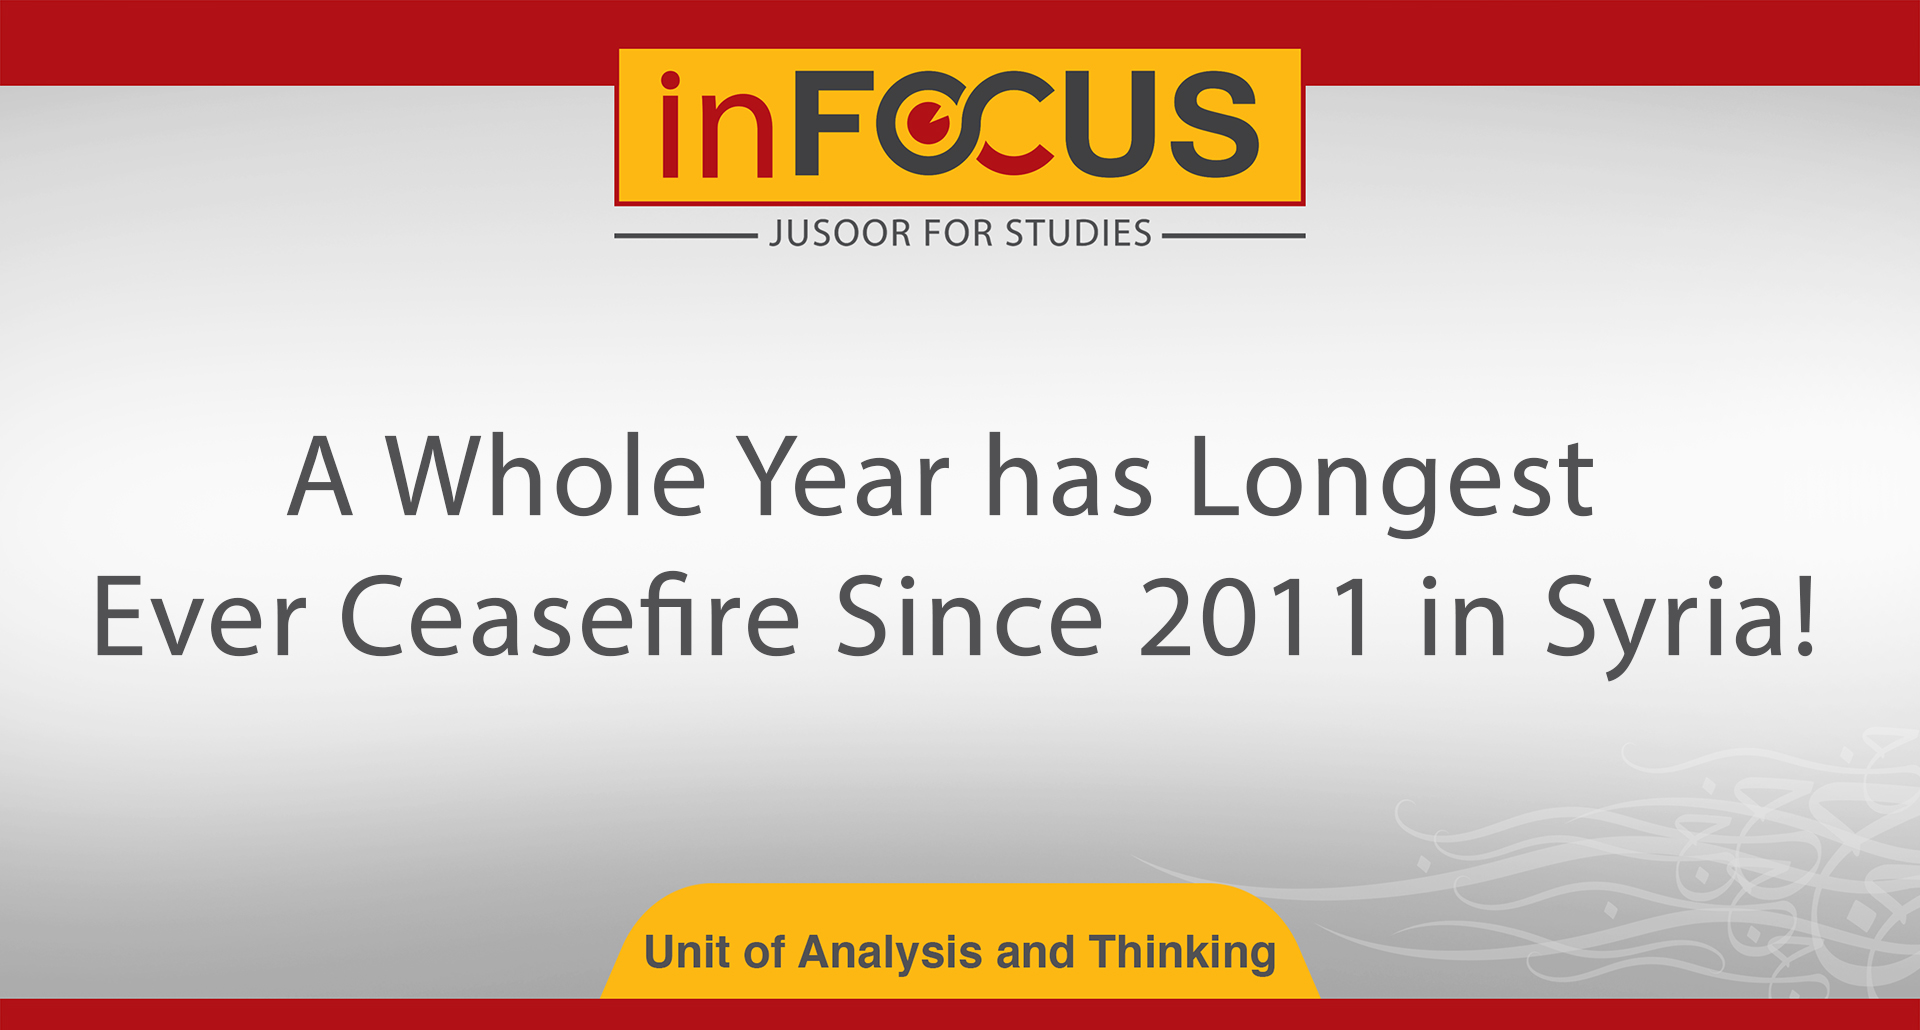 A Whole Year has Longest Ever Ceasefire Since 2011 in Syria!